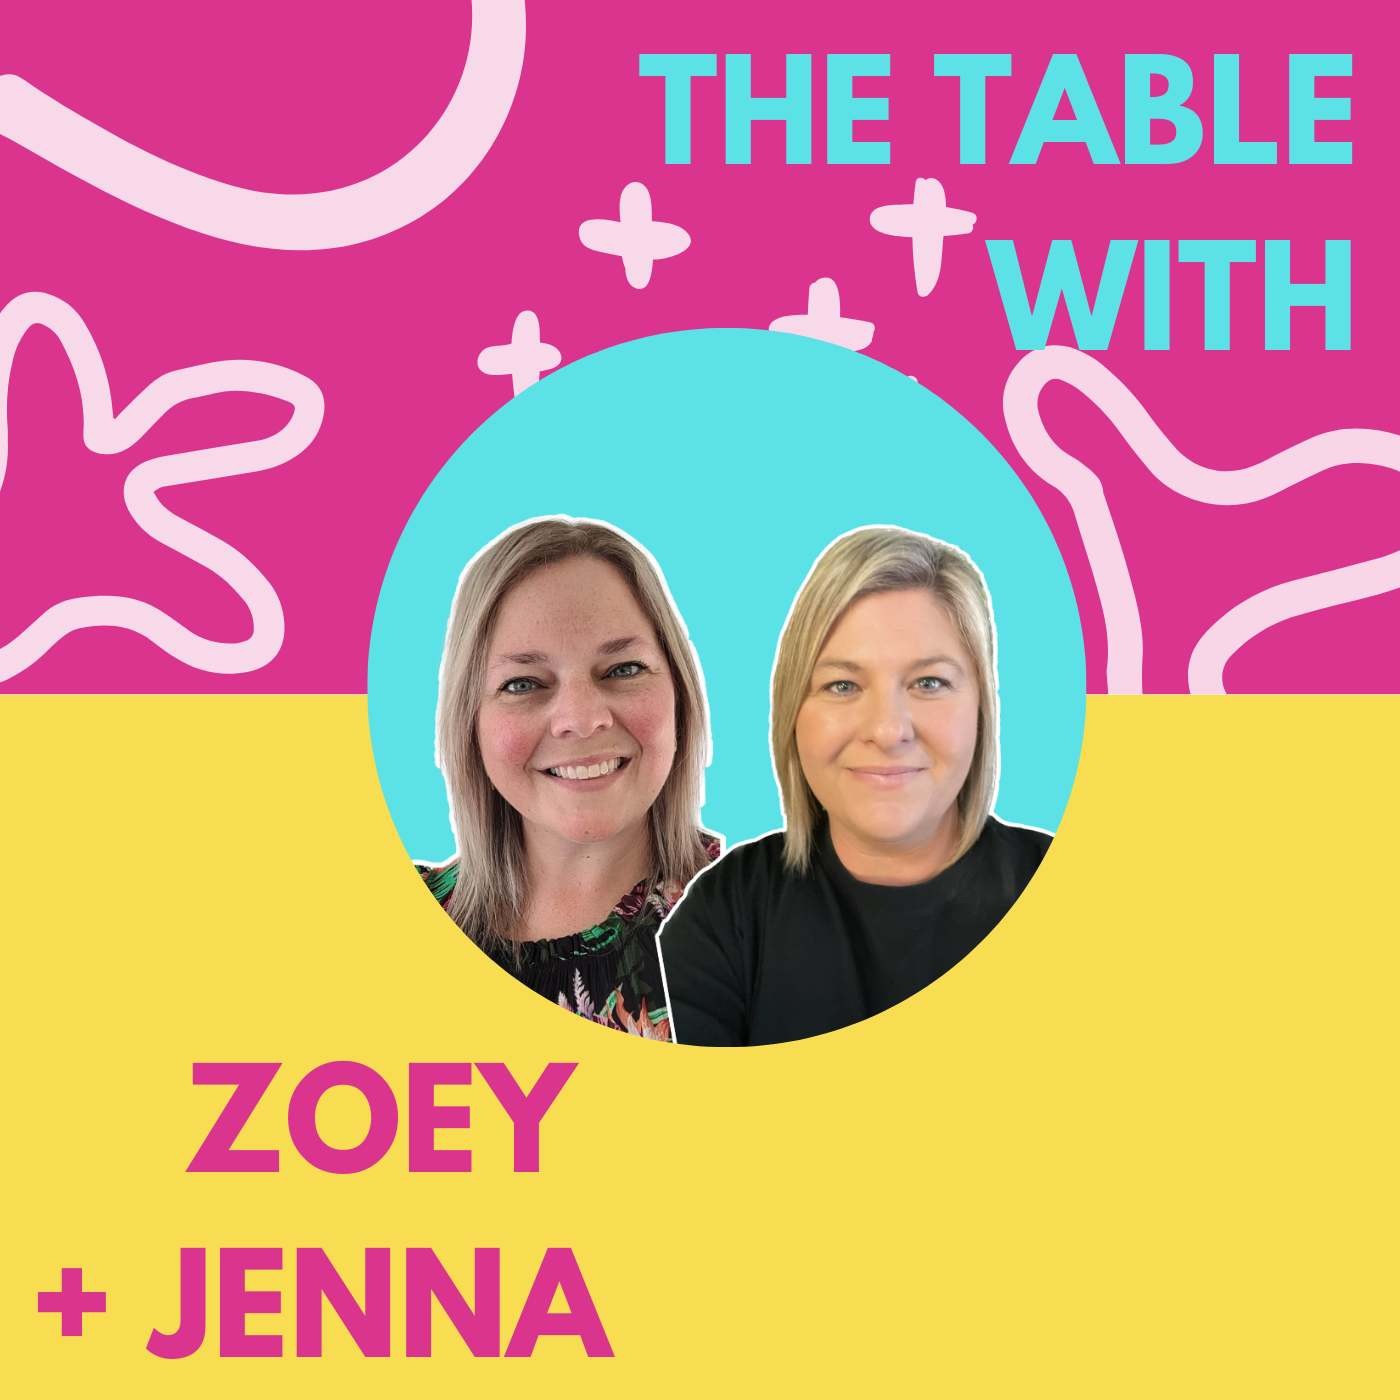 The Table with Zoey + Jenna